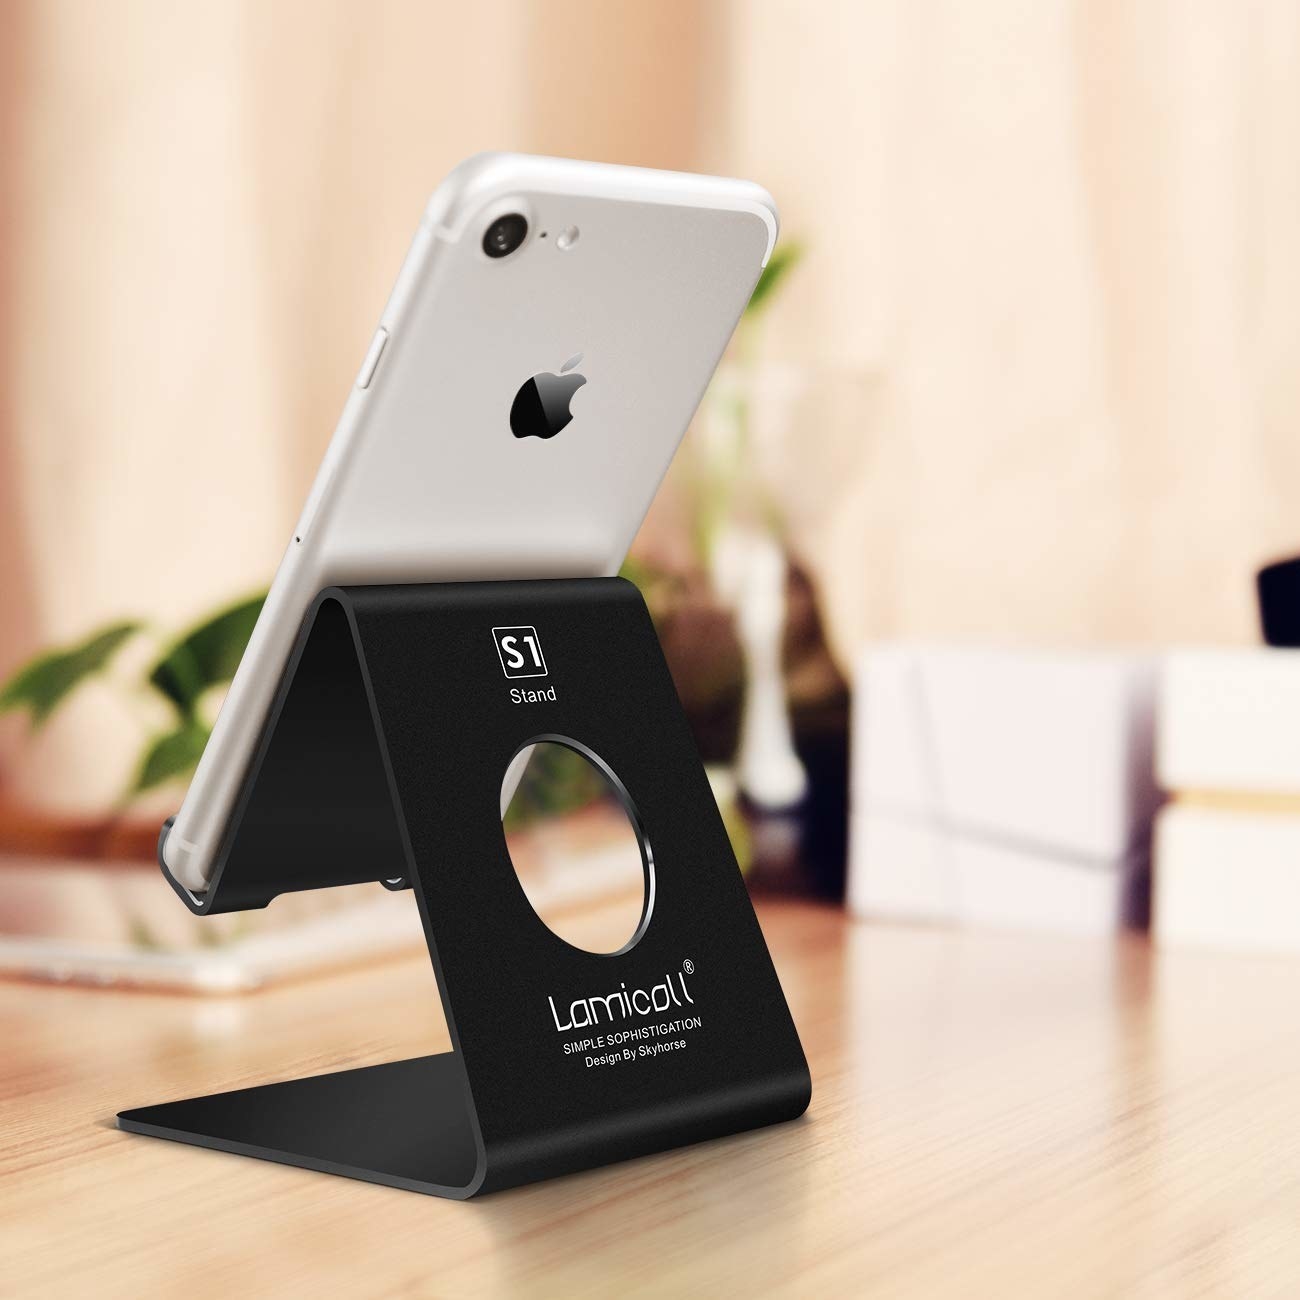 Upgrade Your Phone Safety With This Silicone Mobile Phone Holder